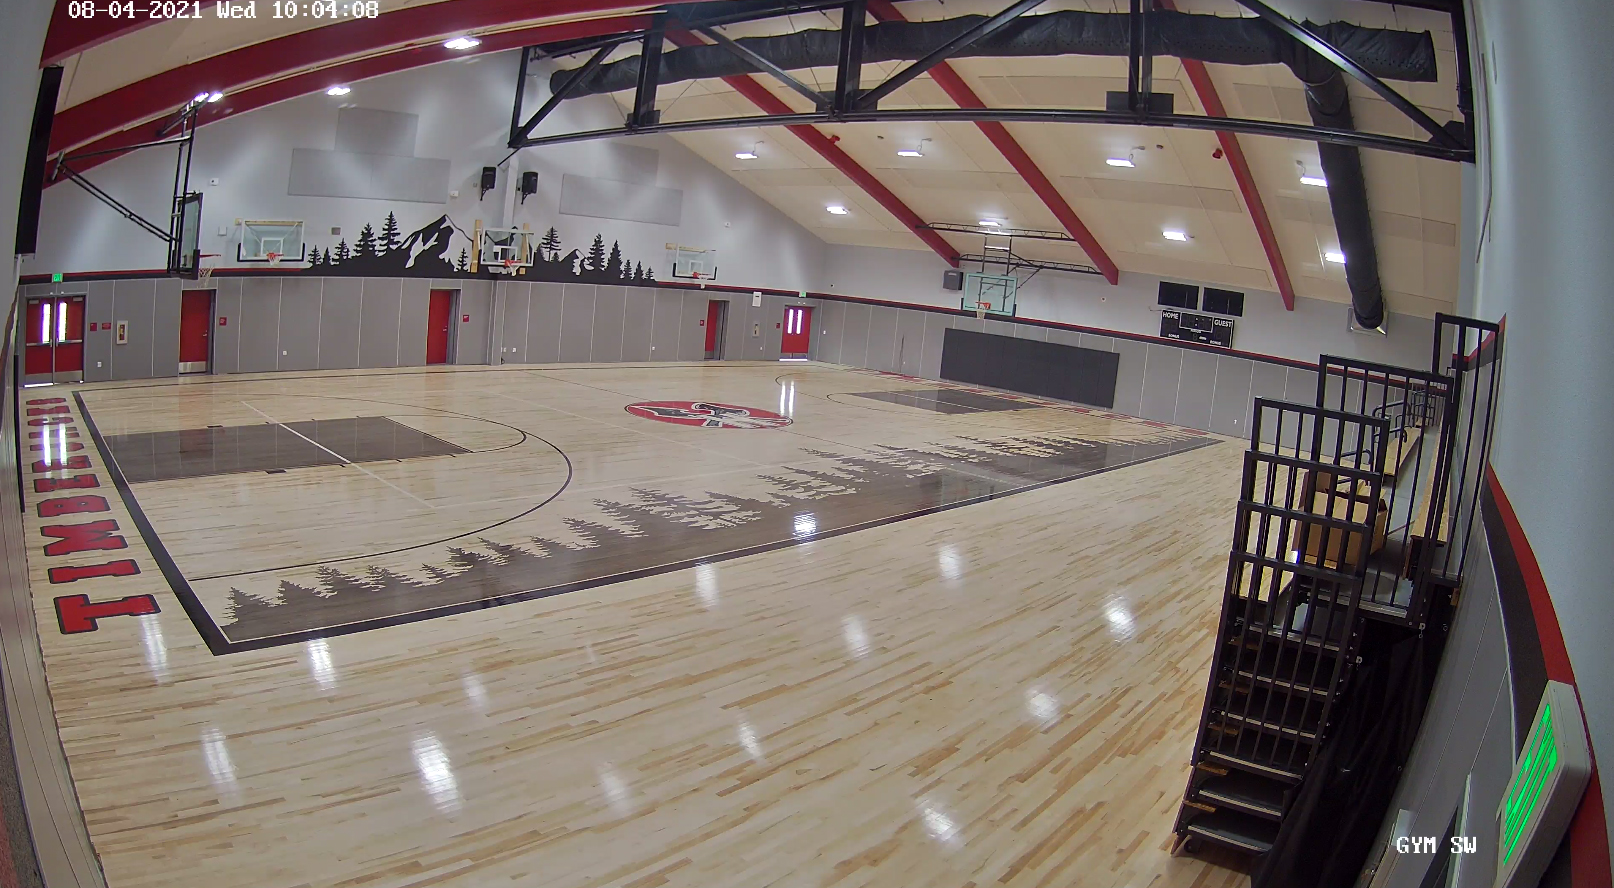 Finished gym interior, with forest art over side of basketball court and on wall by shot counter.